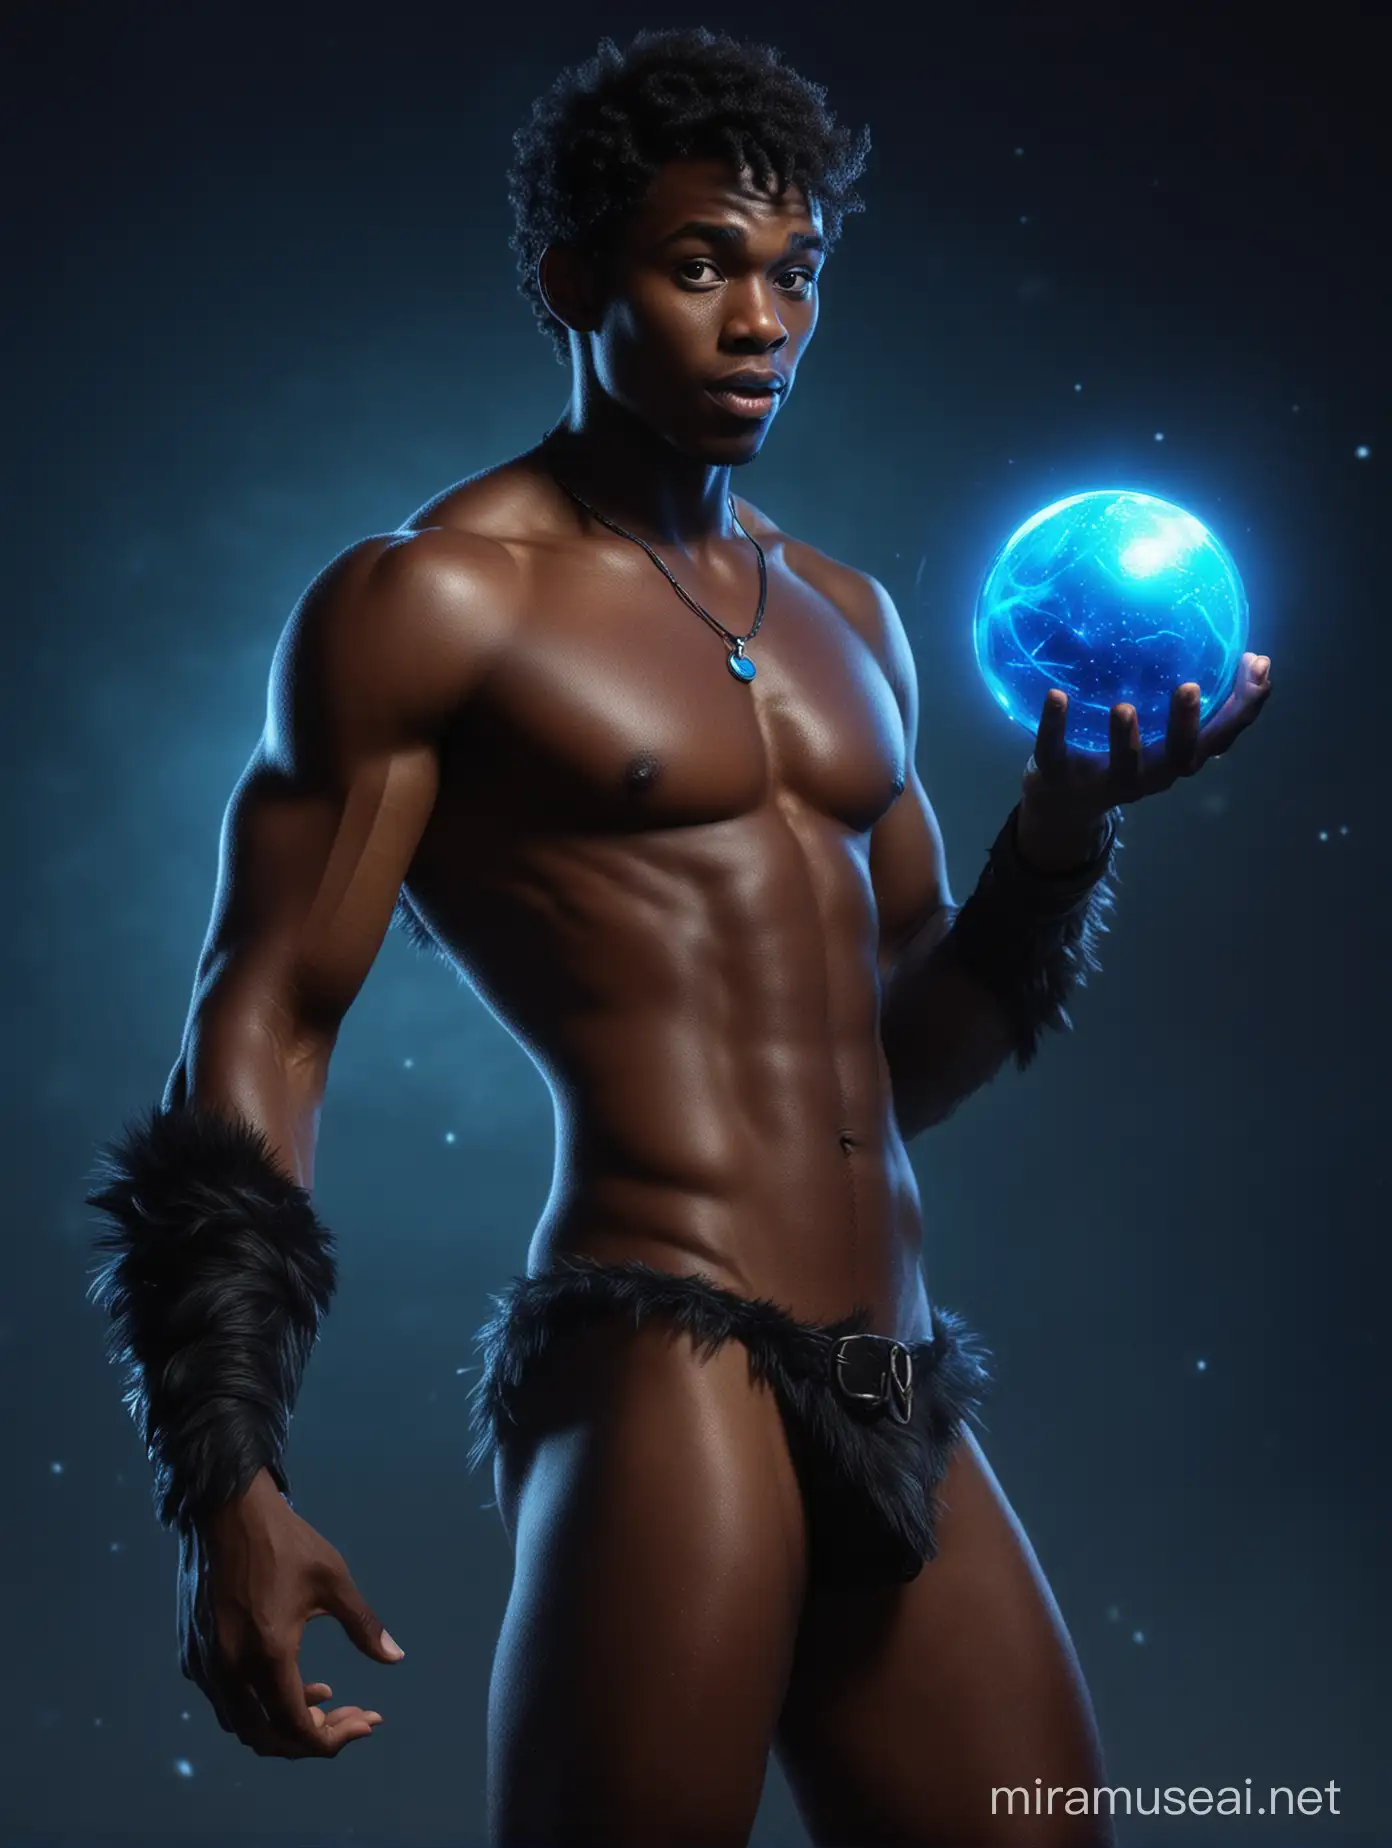 Realistic muscular sweaty shirtless black Peter Pan, in fur loincloth, holding a shiny blue orb, and flying in the sky at night with neon colors ambient.